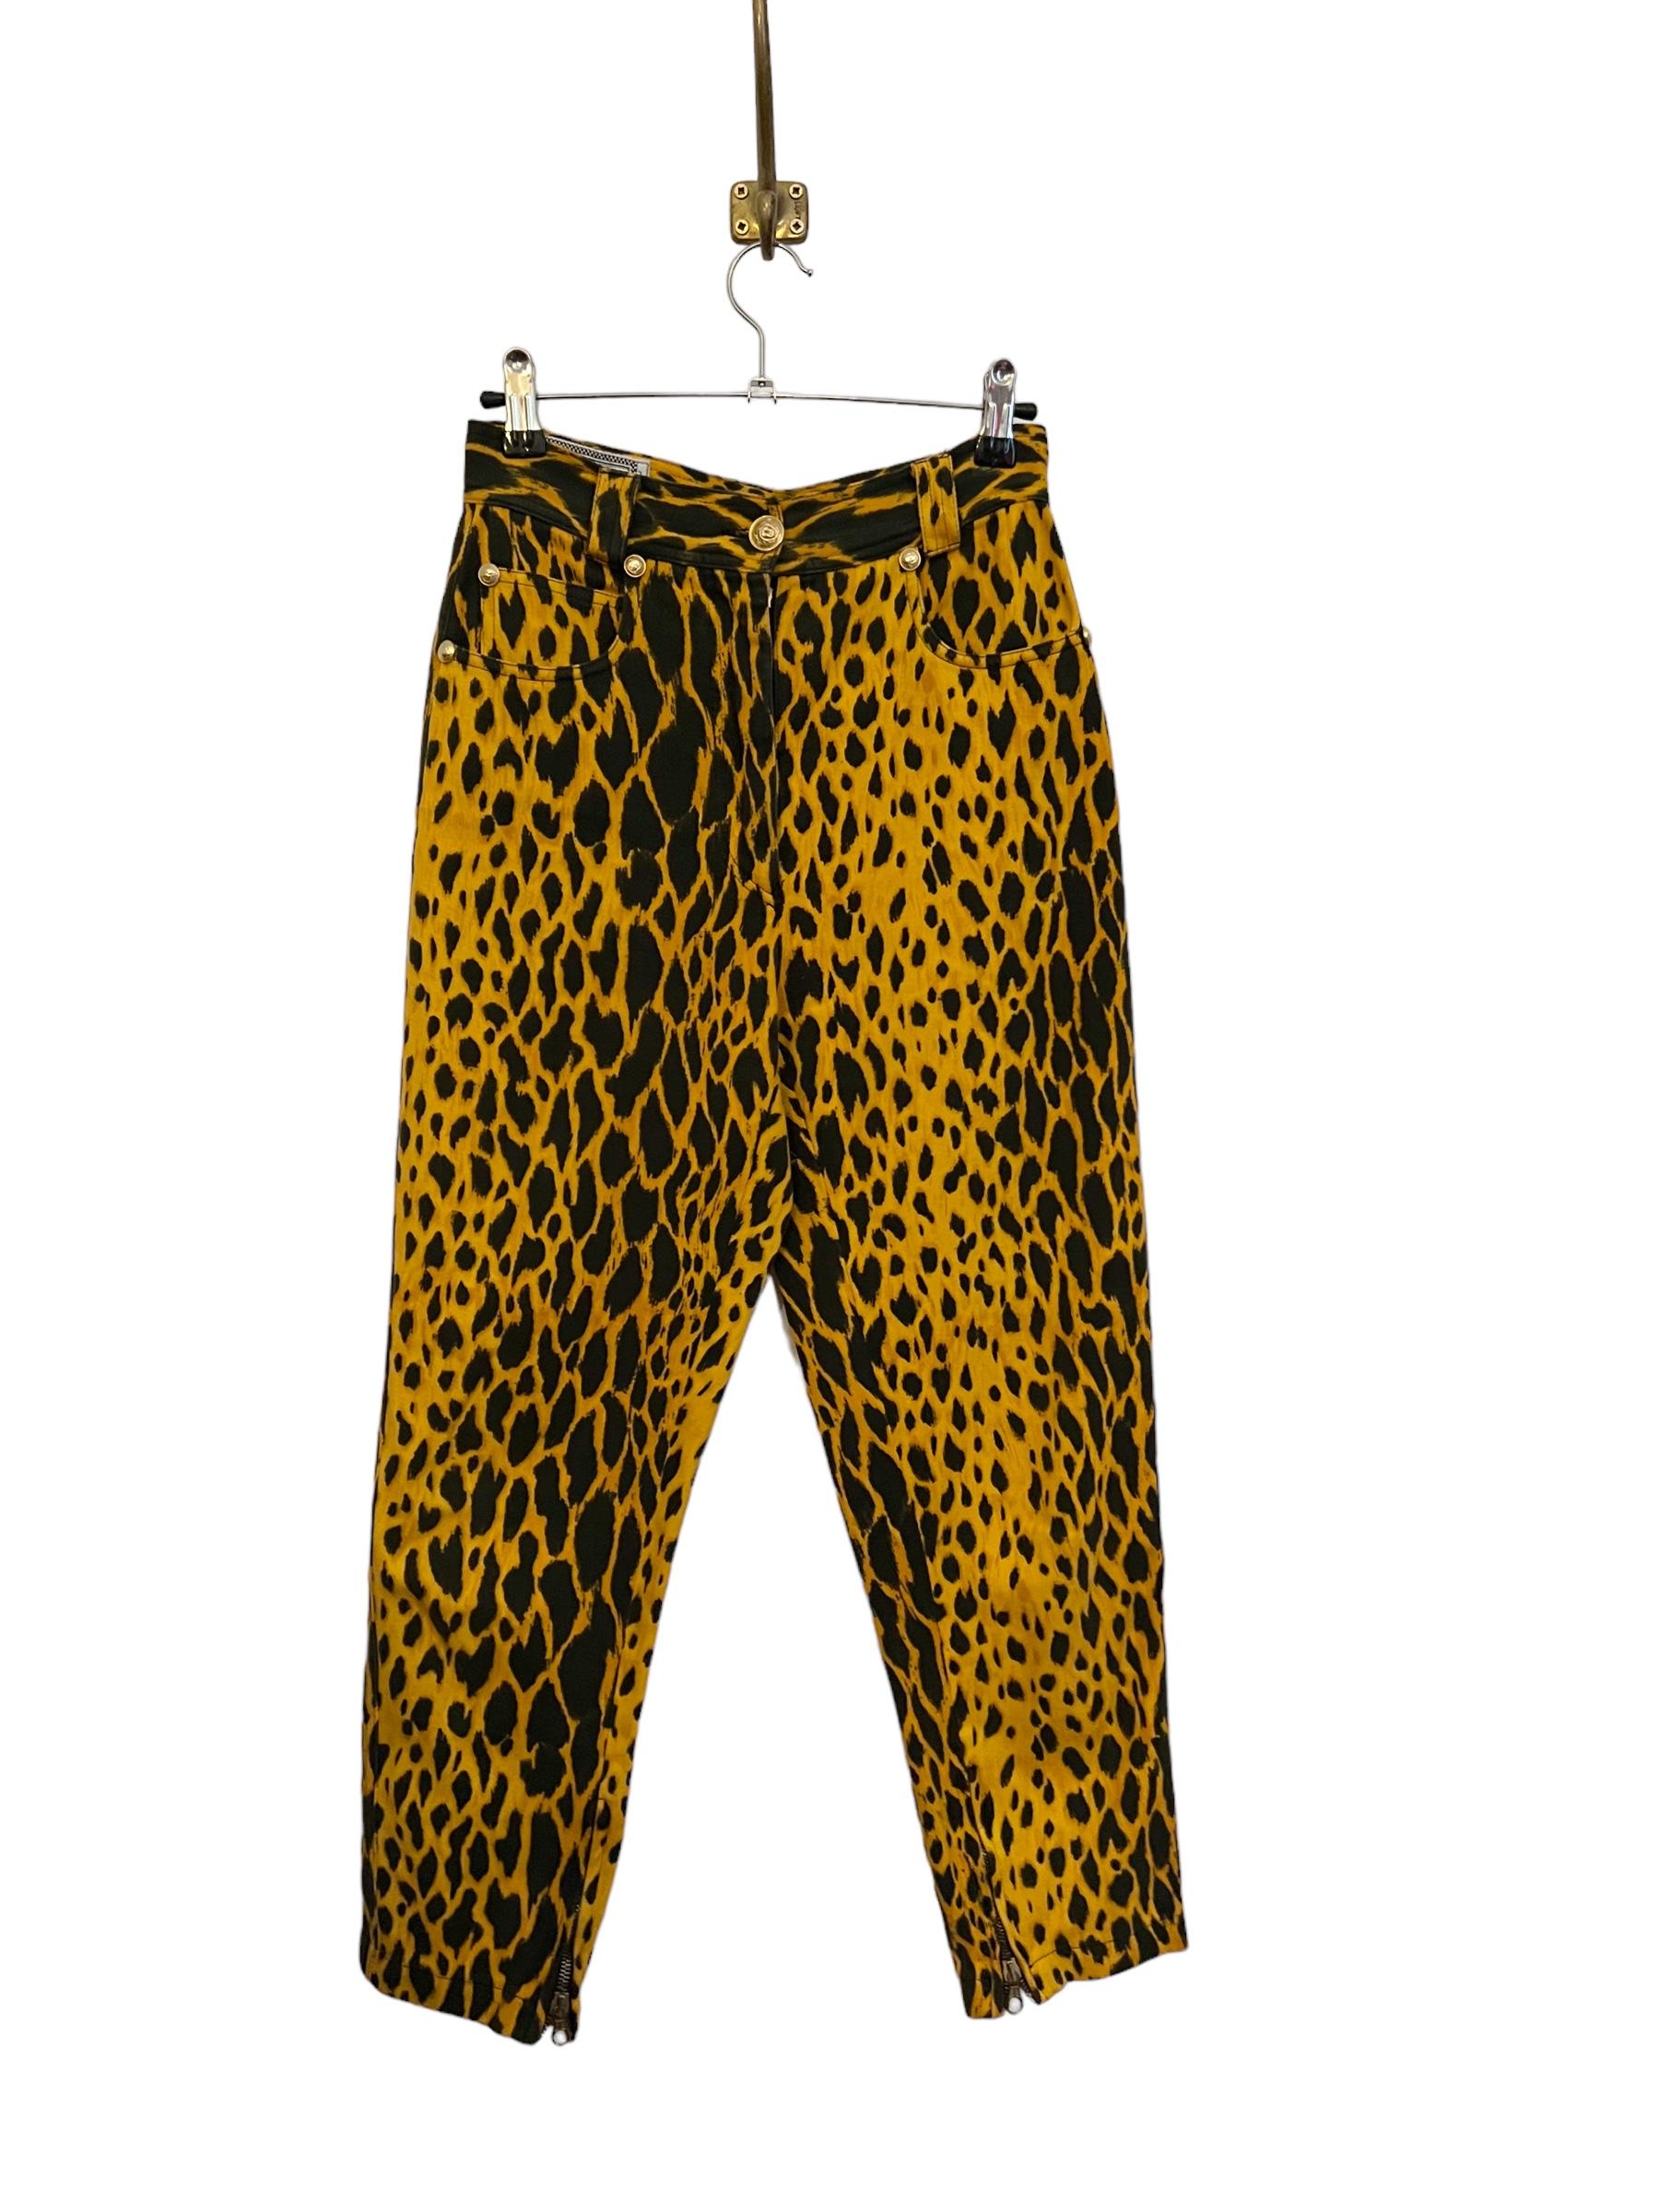 Iconic Spring/ Summer 1992 Vintage Gianni Versace Runway Cheetah patterned, High waisted jeans with Gold Medusa Hardware details. 

MADE IN ITALY

Features:
Button fasten
Zip
Classic x4 pocket design
High Waisted
Ankle zips

100% Cotton

Sizing: